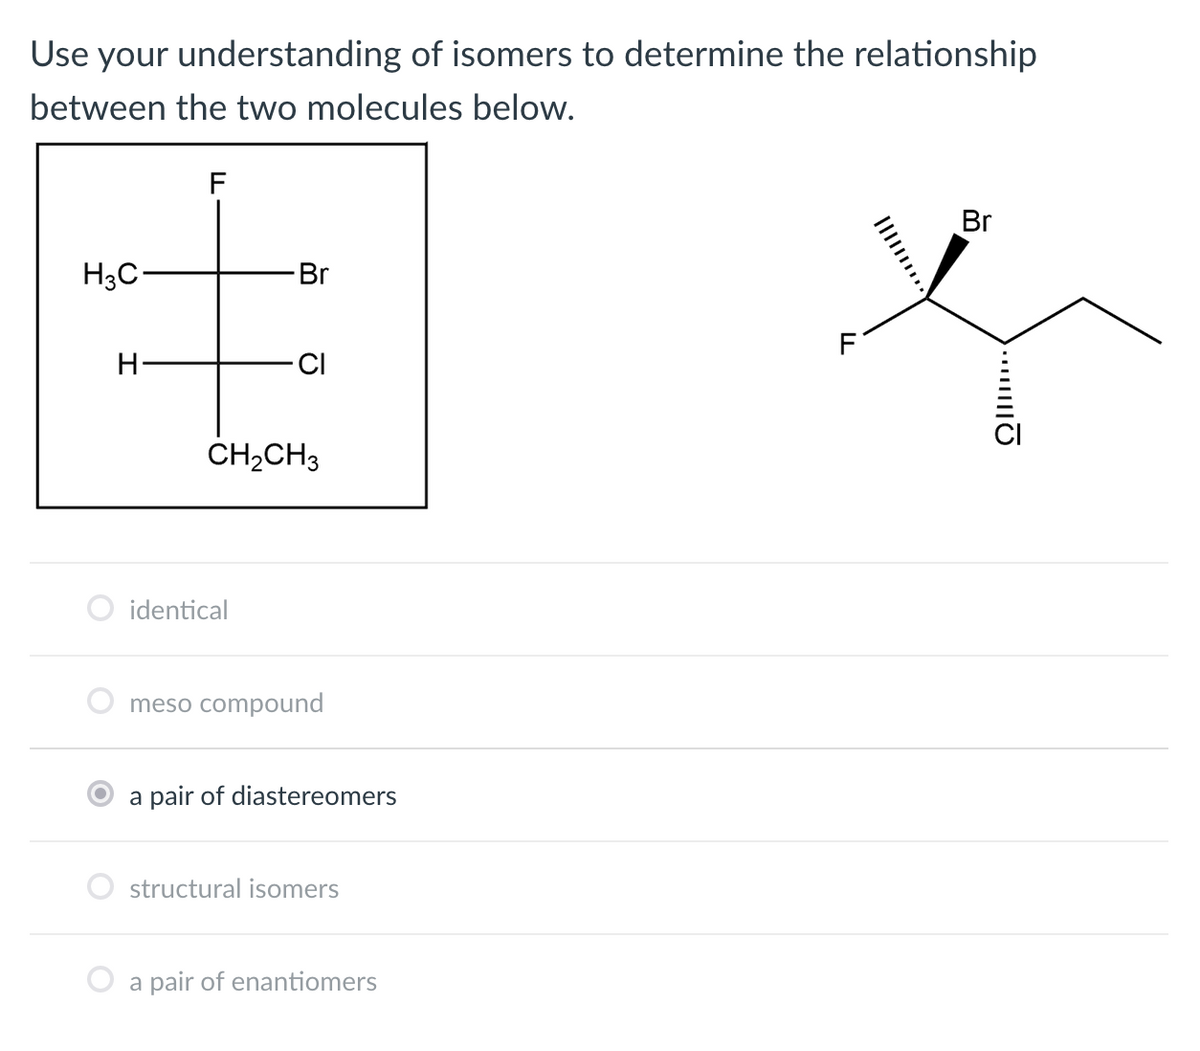 Use your understanding of isomers to determine the relationship
between the two molecules below.
Br
H3C
Br
F
H-
CI
ČH,CH3
identical
meso compound
a pair of diastereomers
structural isomers
a pair of enantiomers
II
